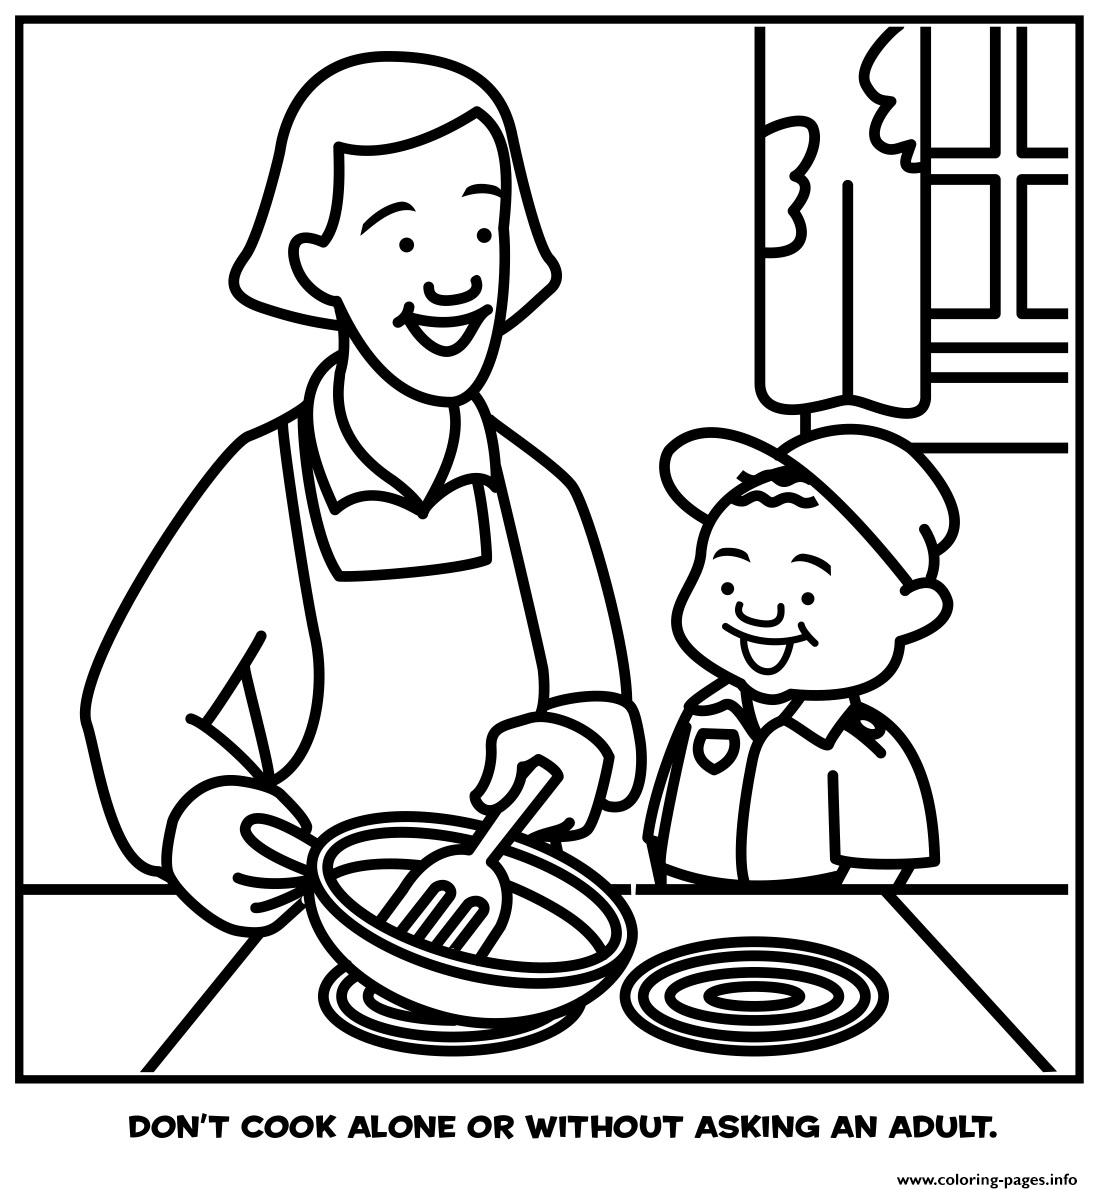 Dont Cook Alone Or Without Asking An Adult coloring